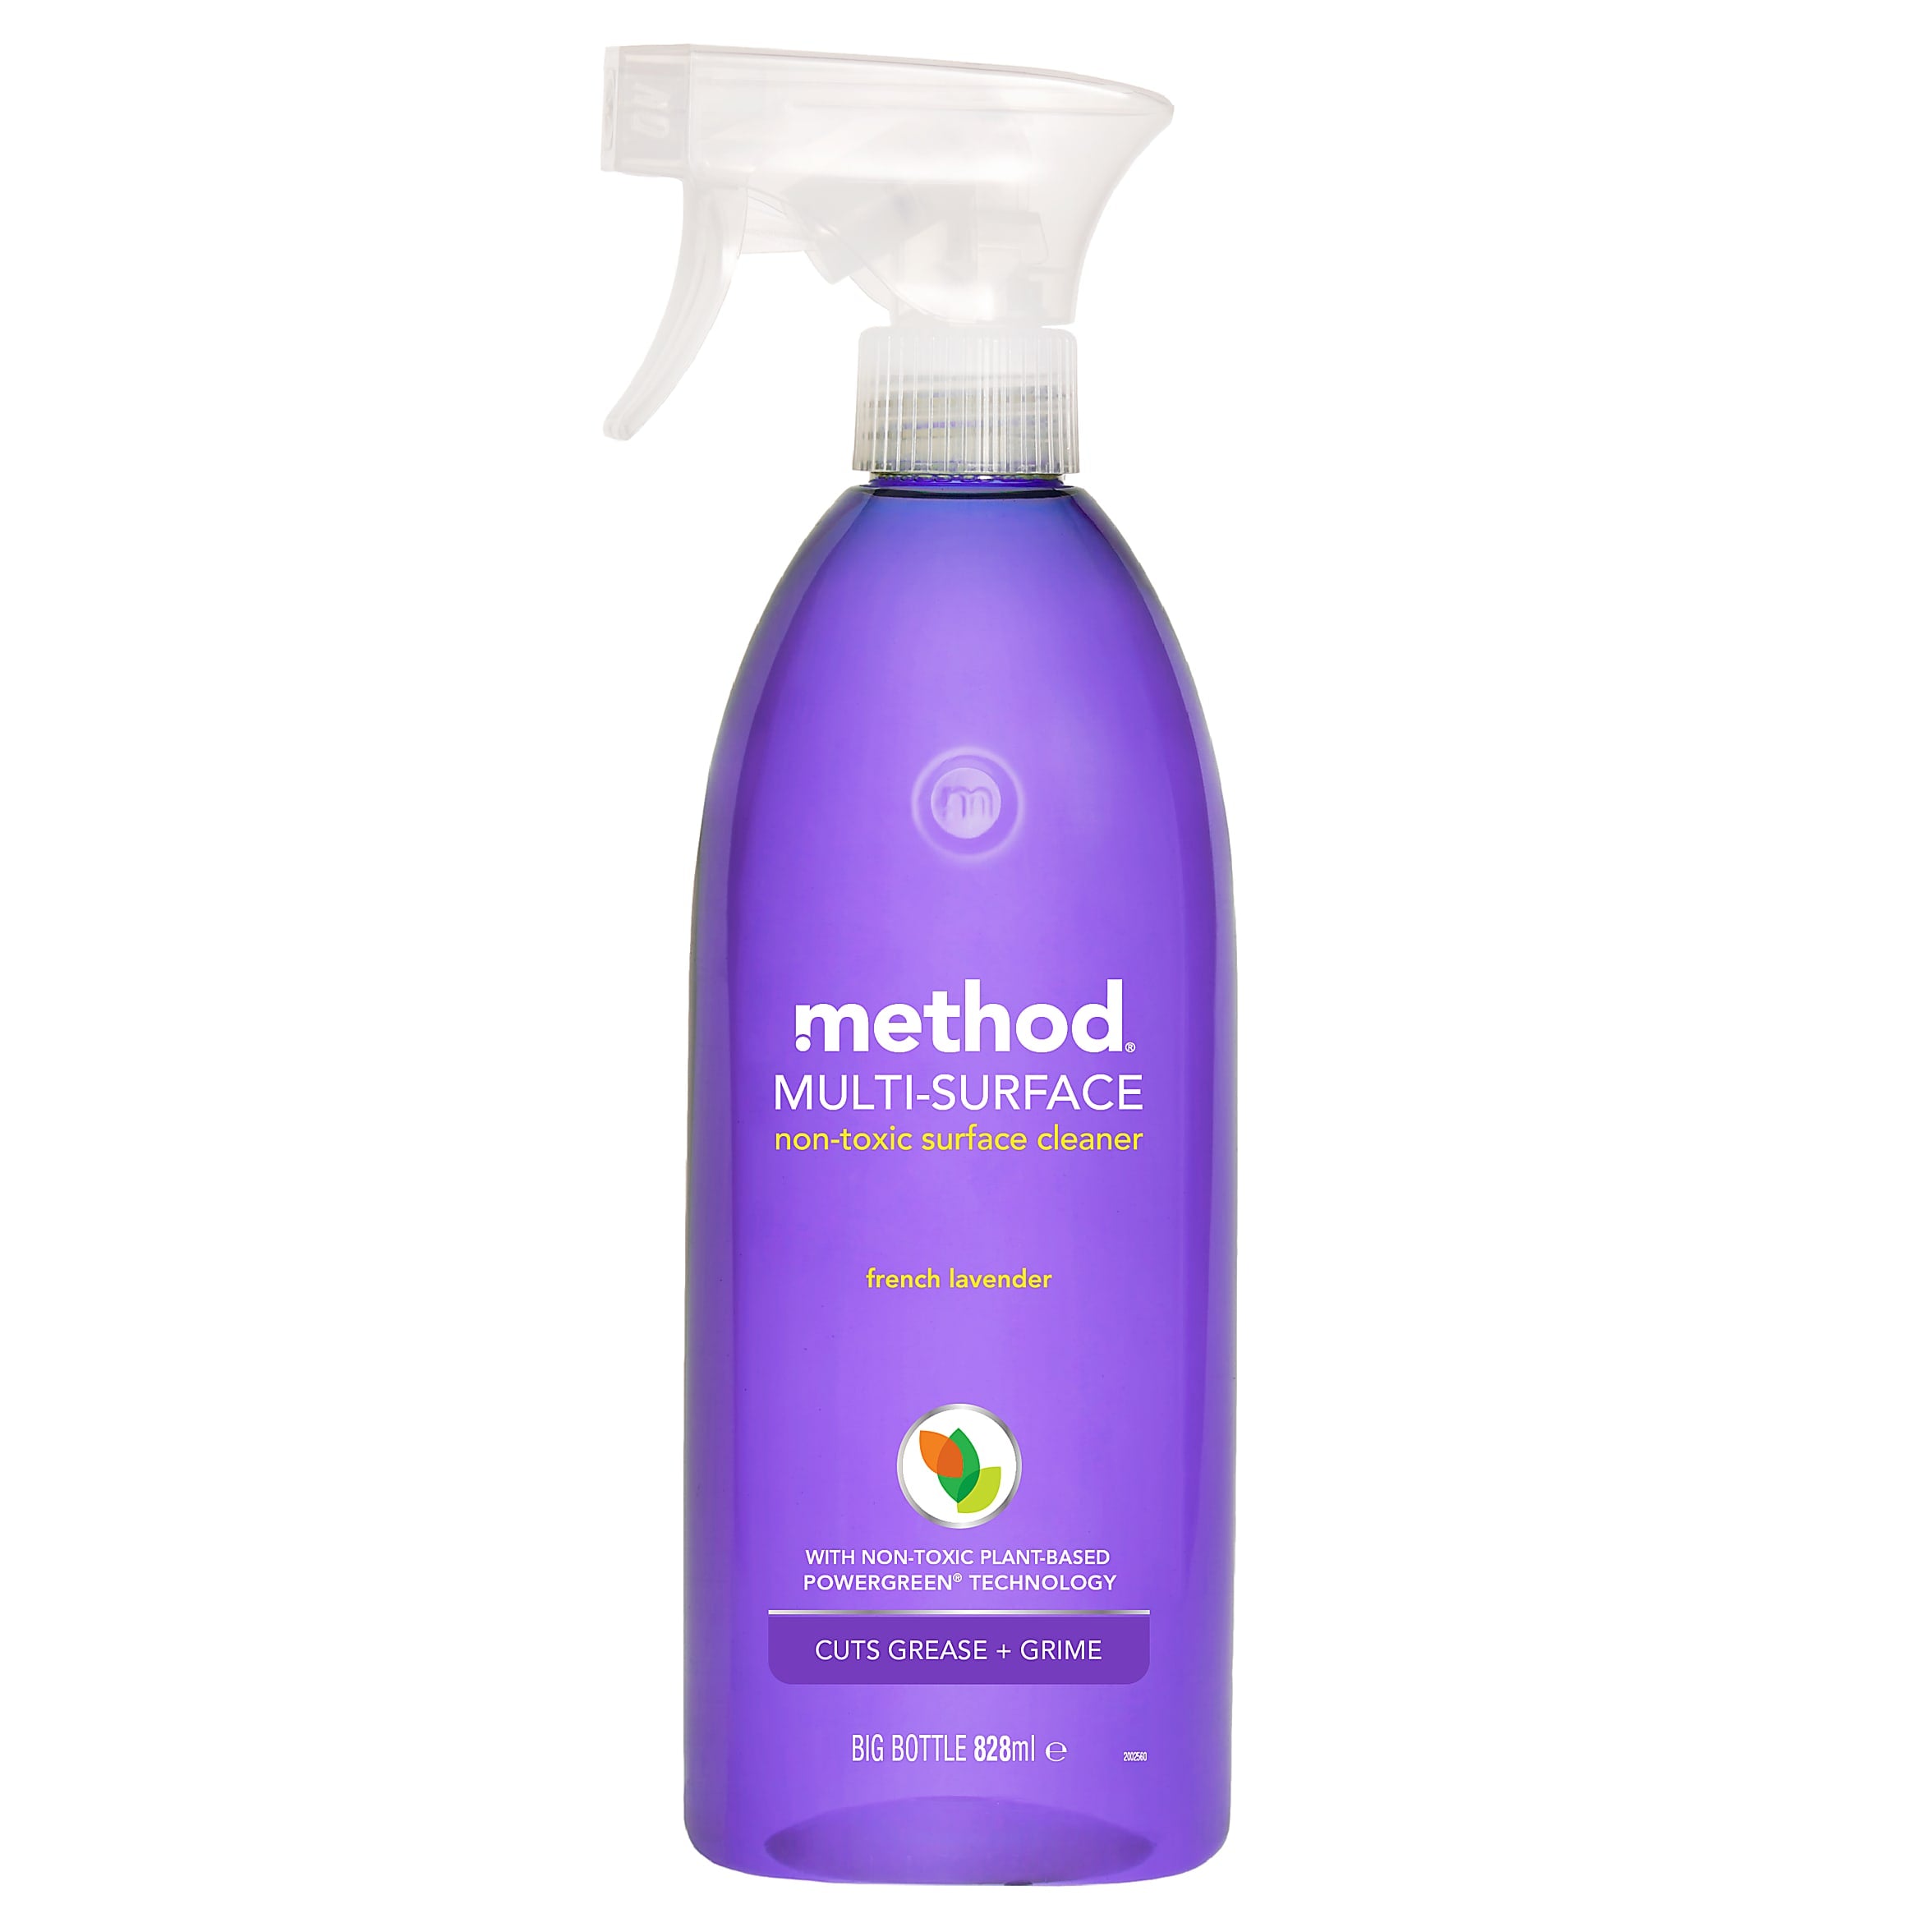 Method Multi-Surface Non-Toxic Surface Cleaner (French Lavender) 828ml